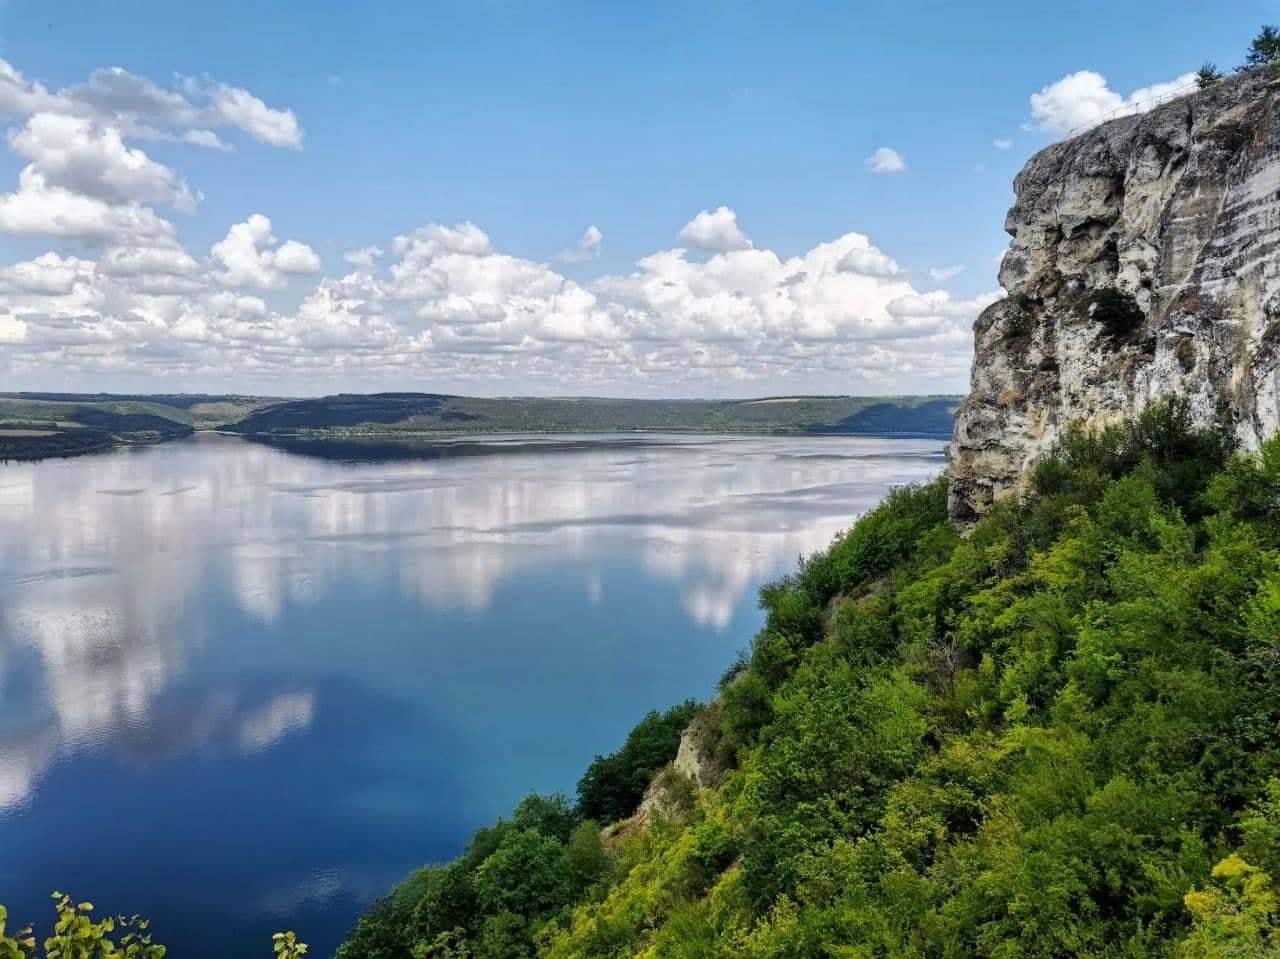 "The demand this year is off the charts".  Where to rest on the banks of the Dniester in summer